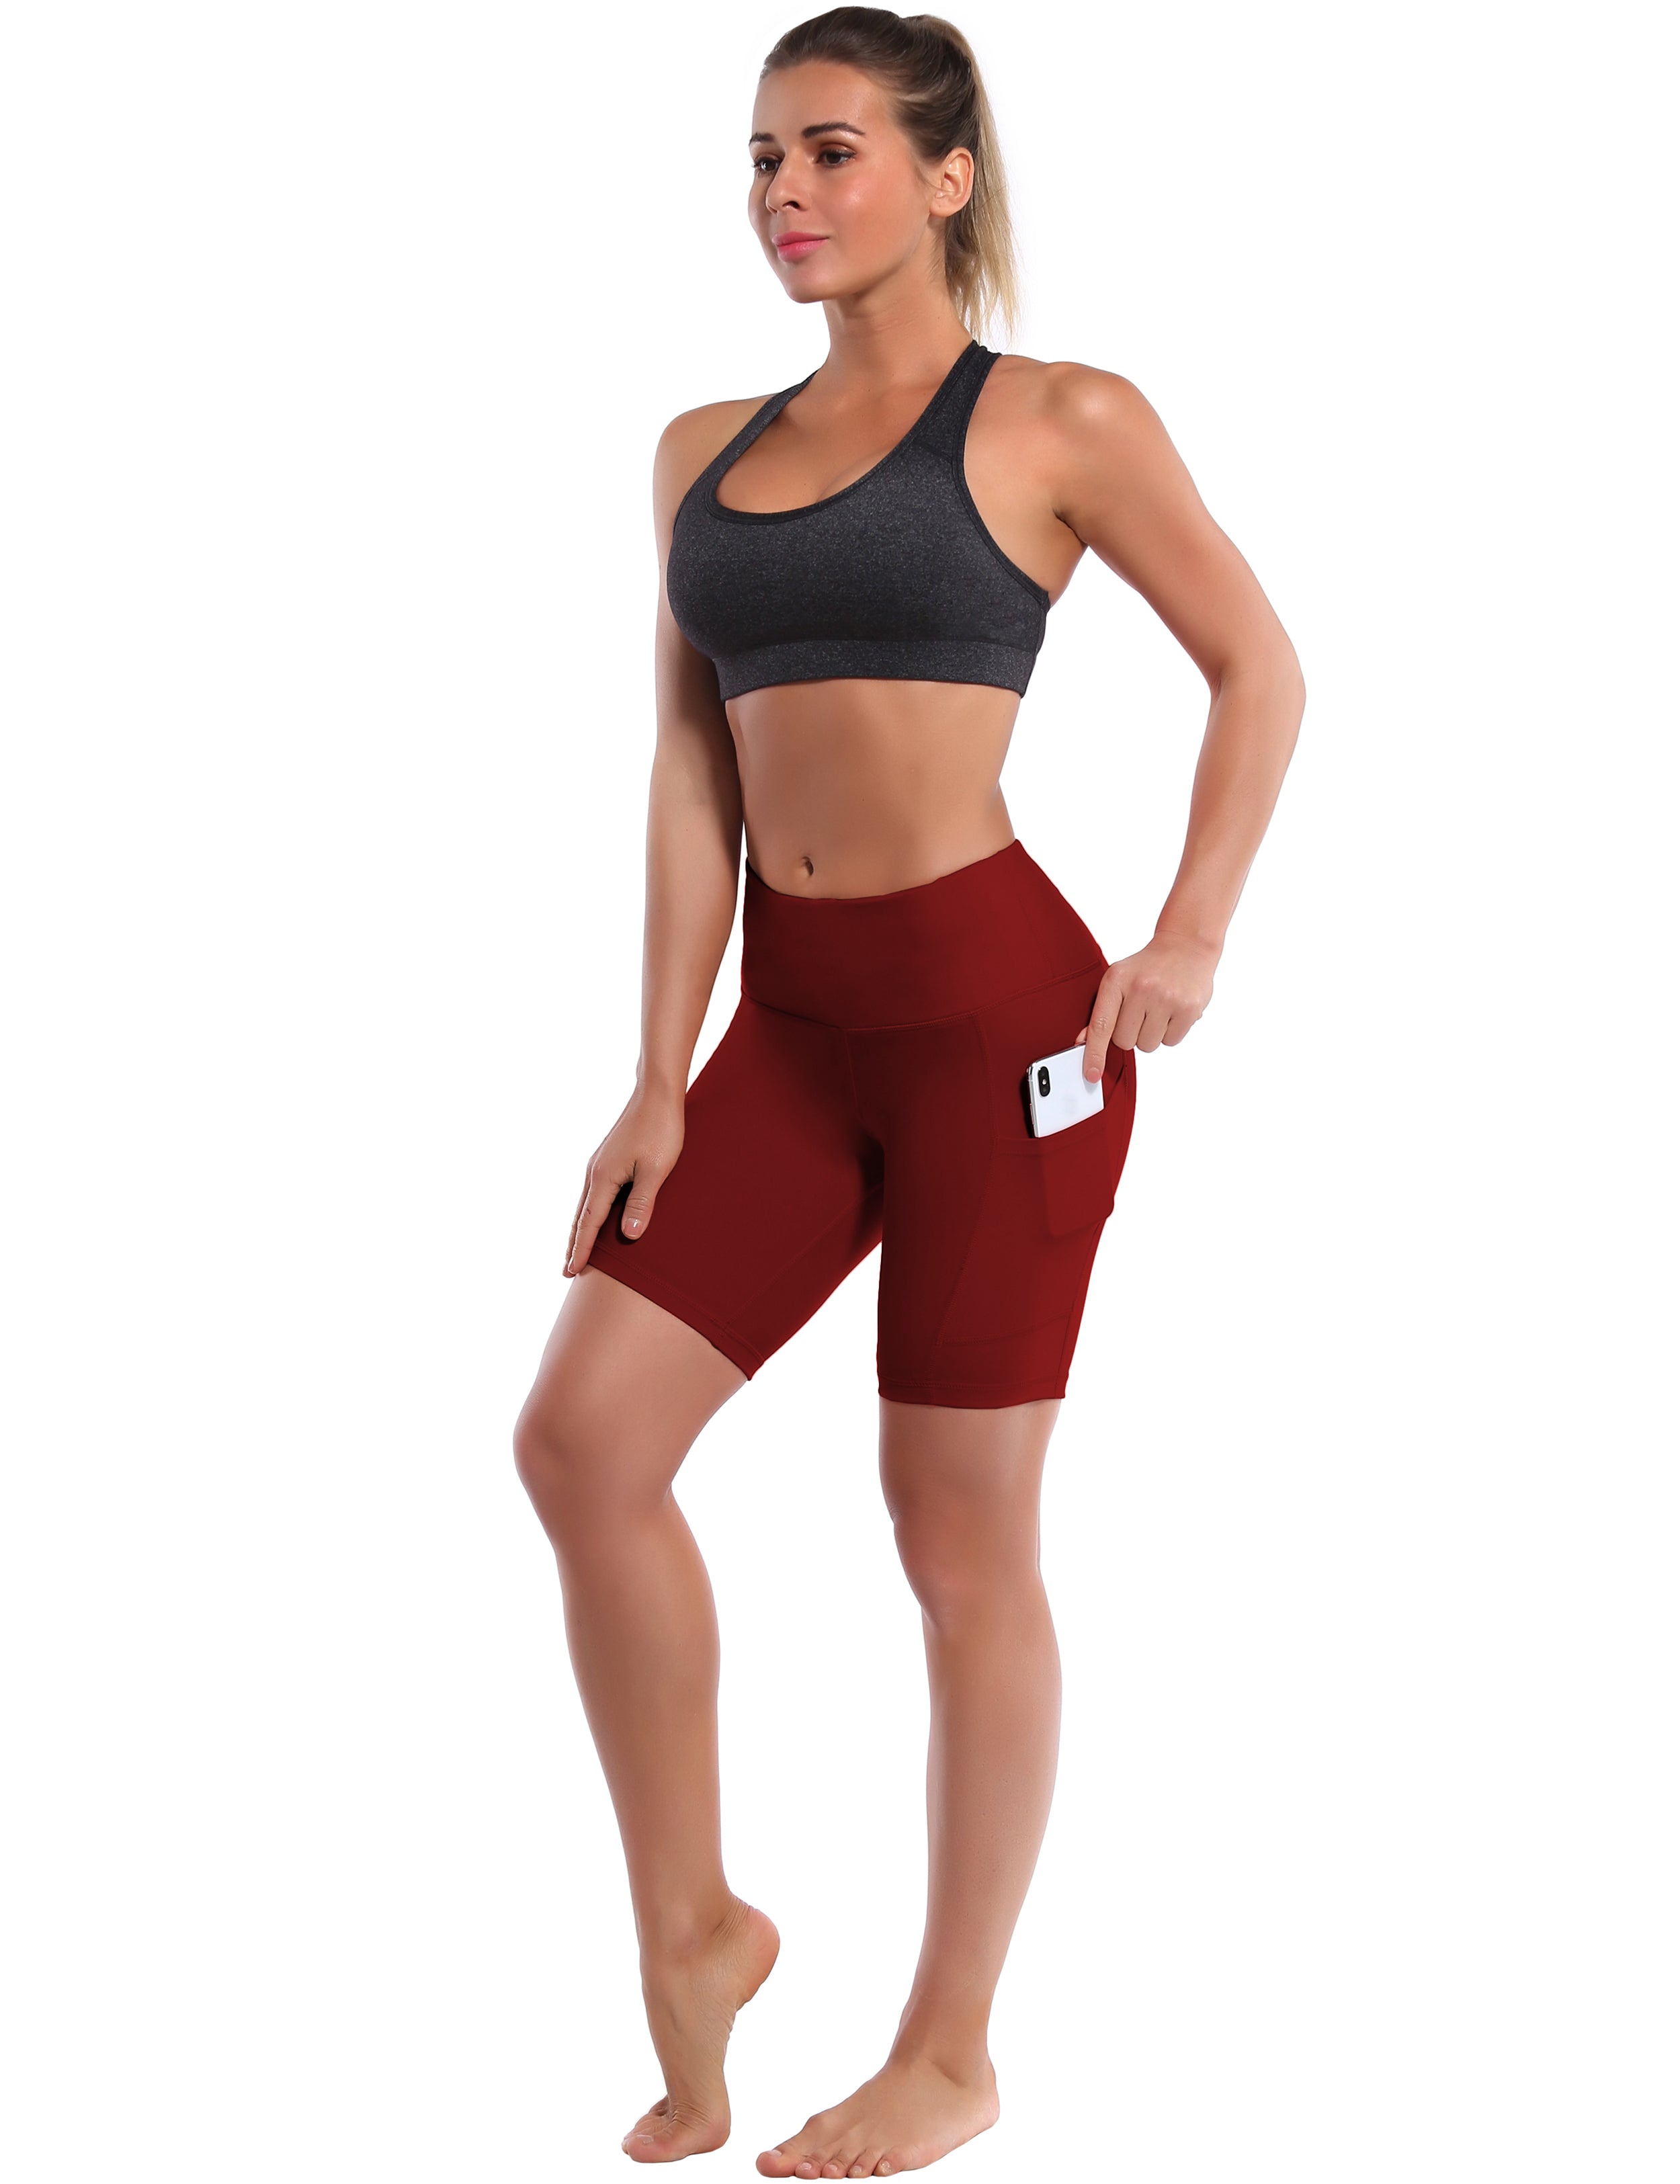 8" Side Pockets Pilates Shorts cherryred Sleek, soft, smooth and totally comfortable: our newest style is here. Softest-ever fabric High elasticity High density 4-way stretch Fabric doesn't attract lint easily No see-through Moisture-wicking Machine wash 75% Nylon, 25% Spandex